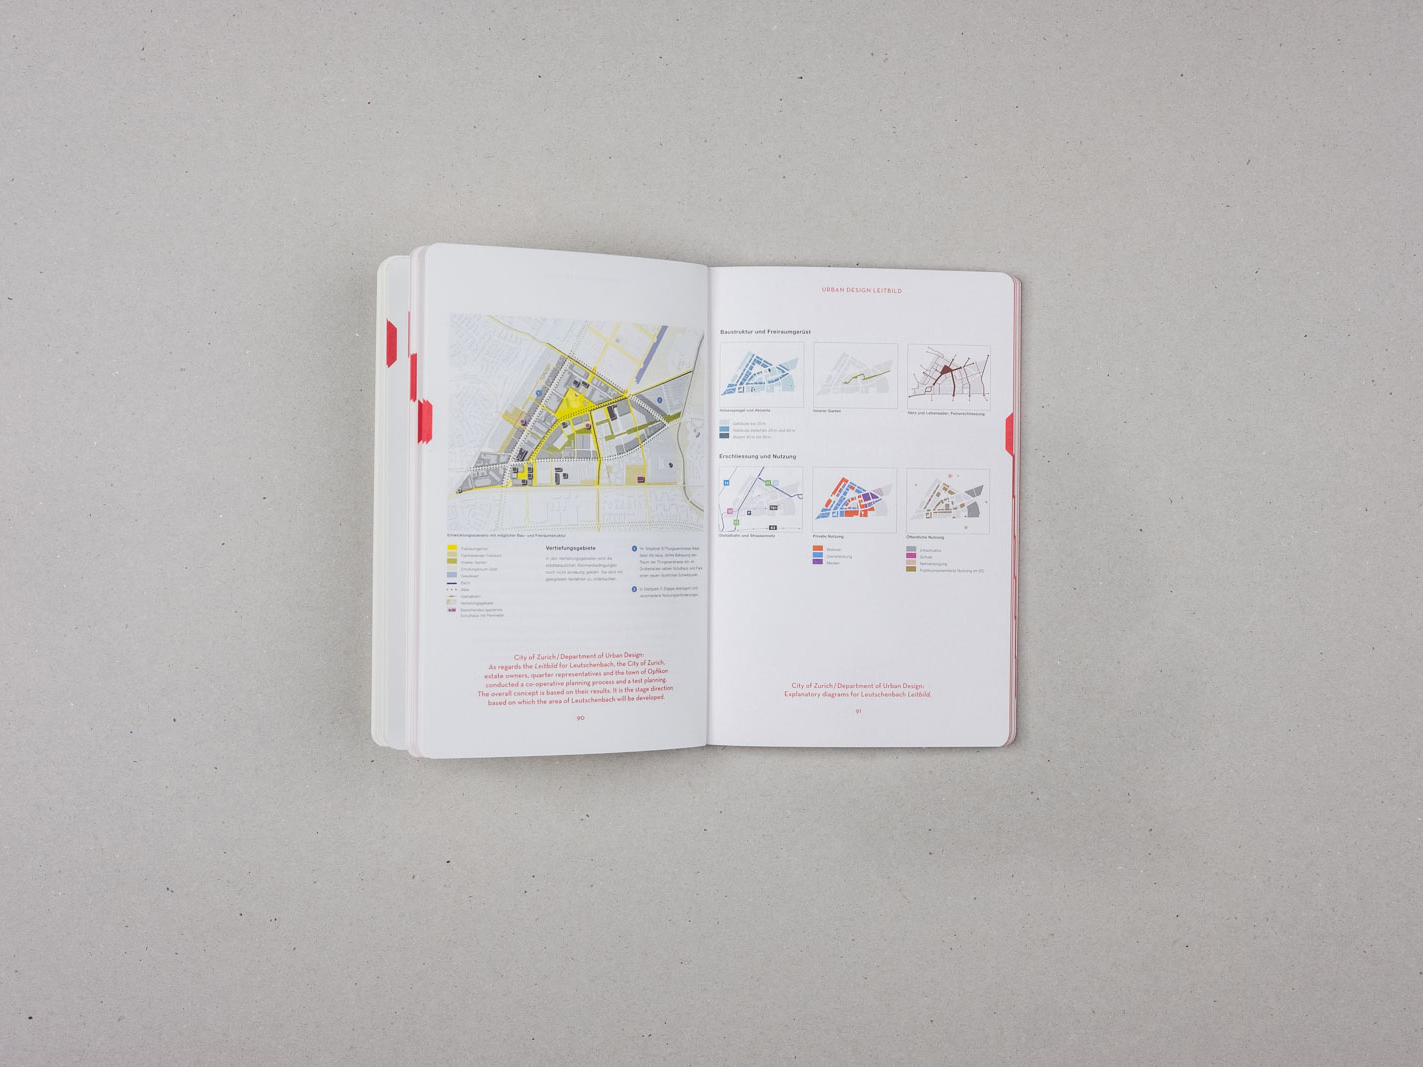 Handbook of Methods for Architecture and Urban Design - 7